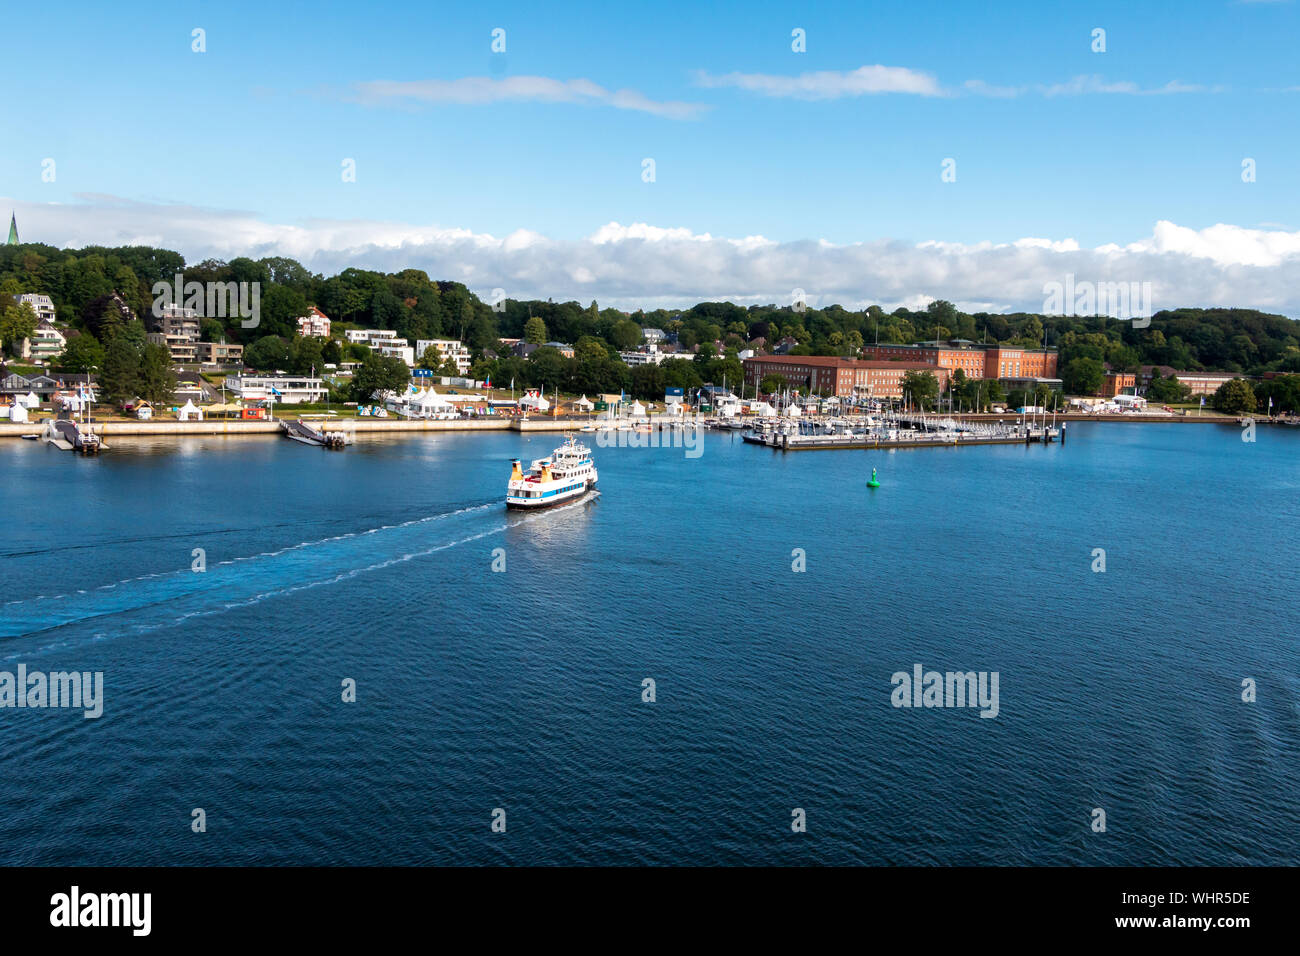 View at the city Kiel, the harbor and the coastline, a beautiful city in North Germany Stock Photo